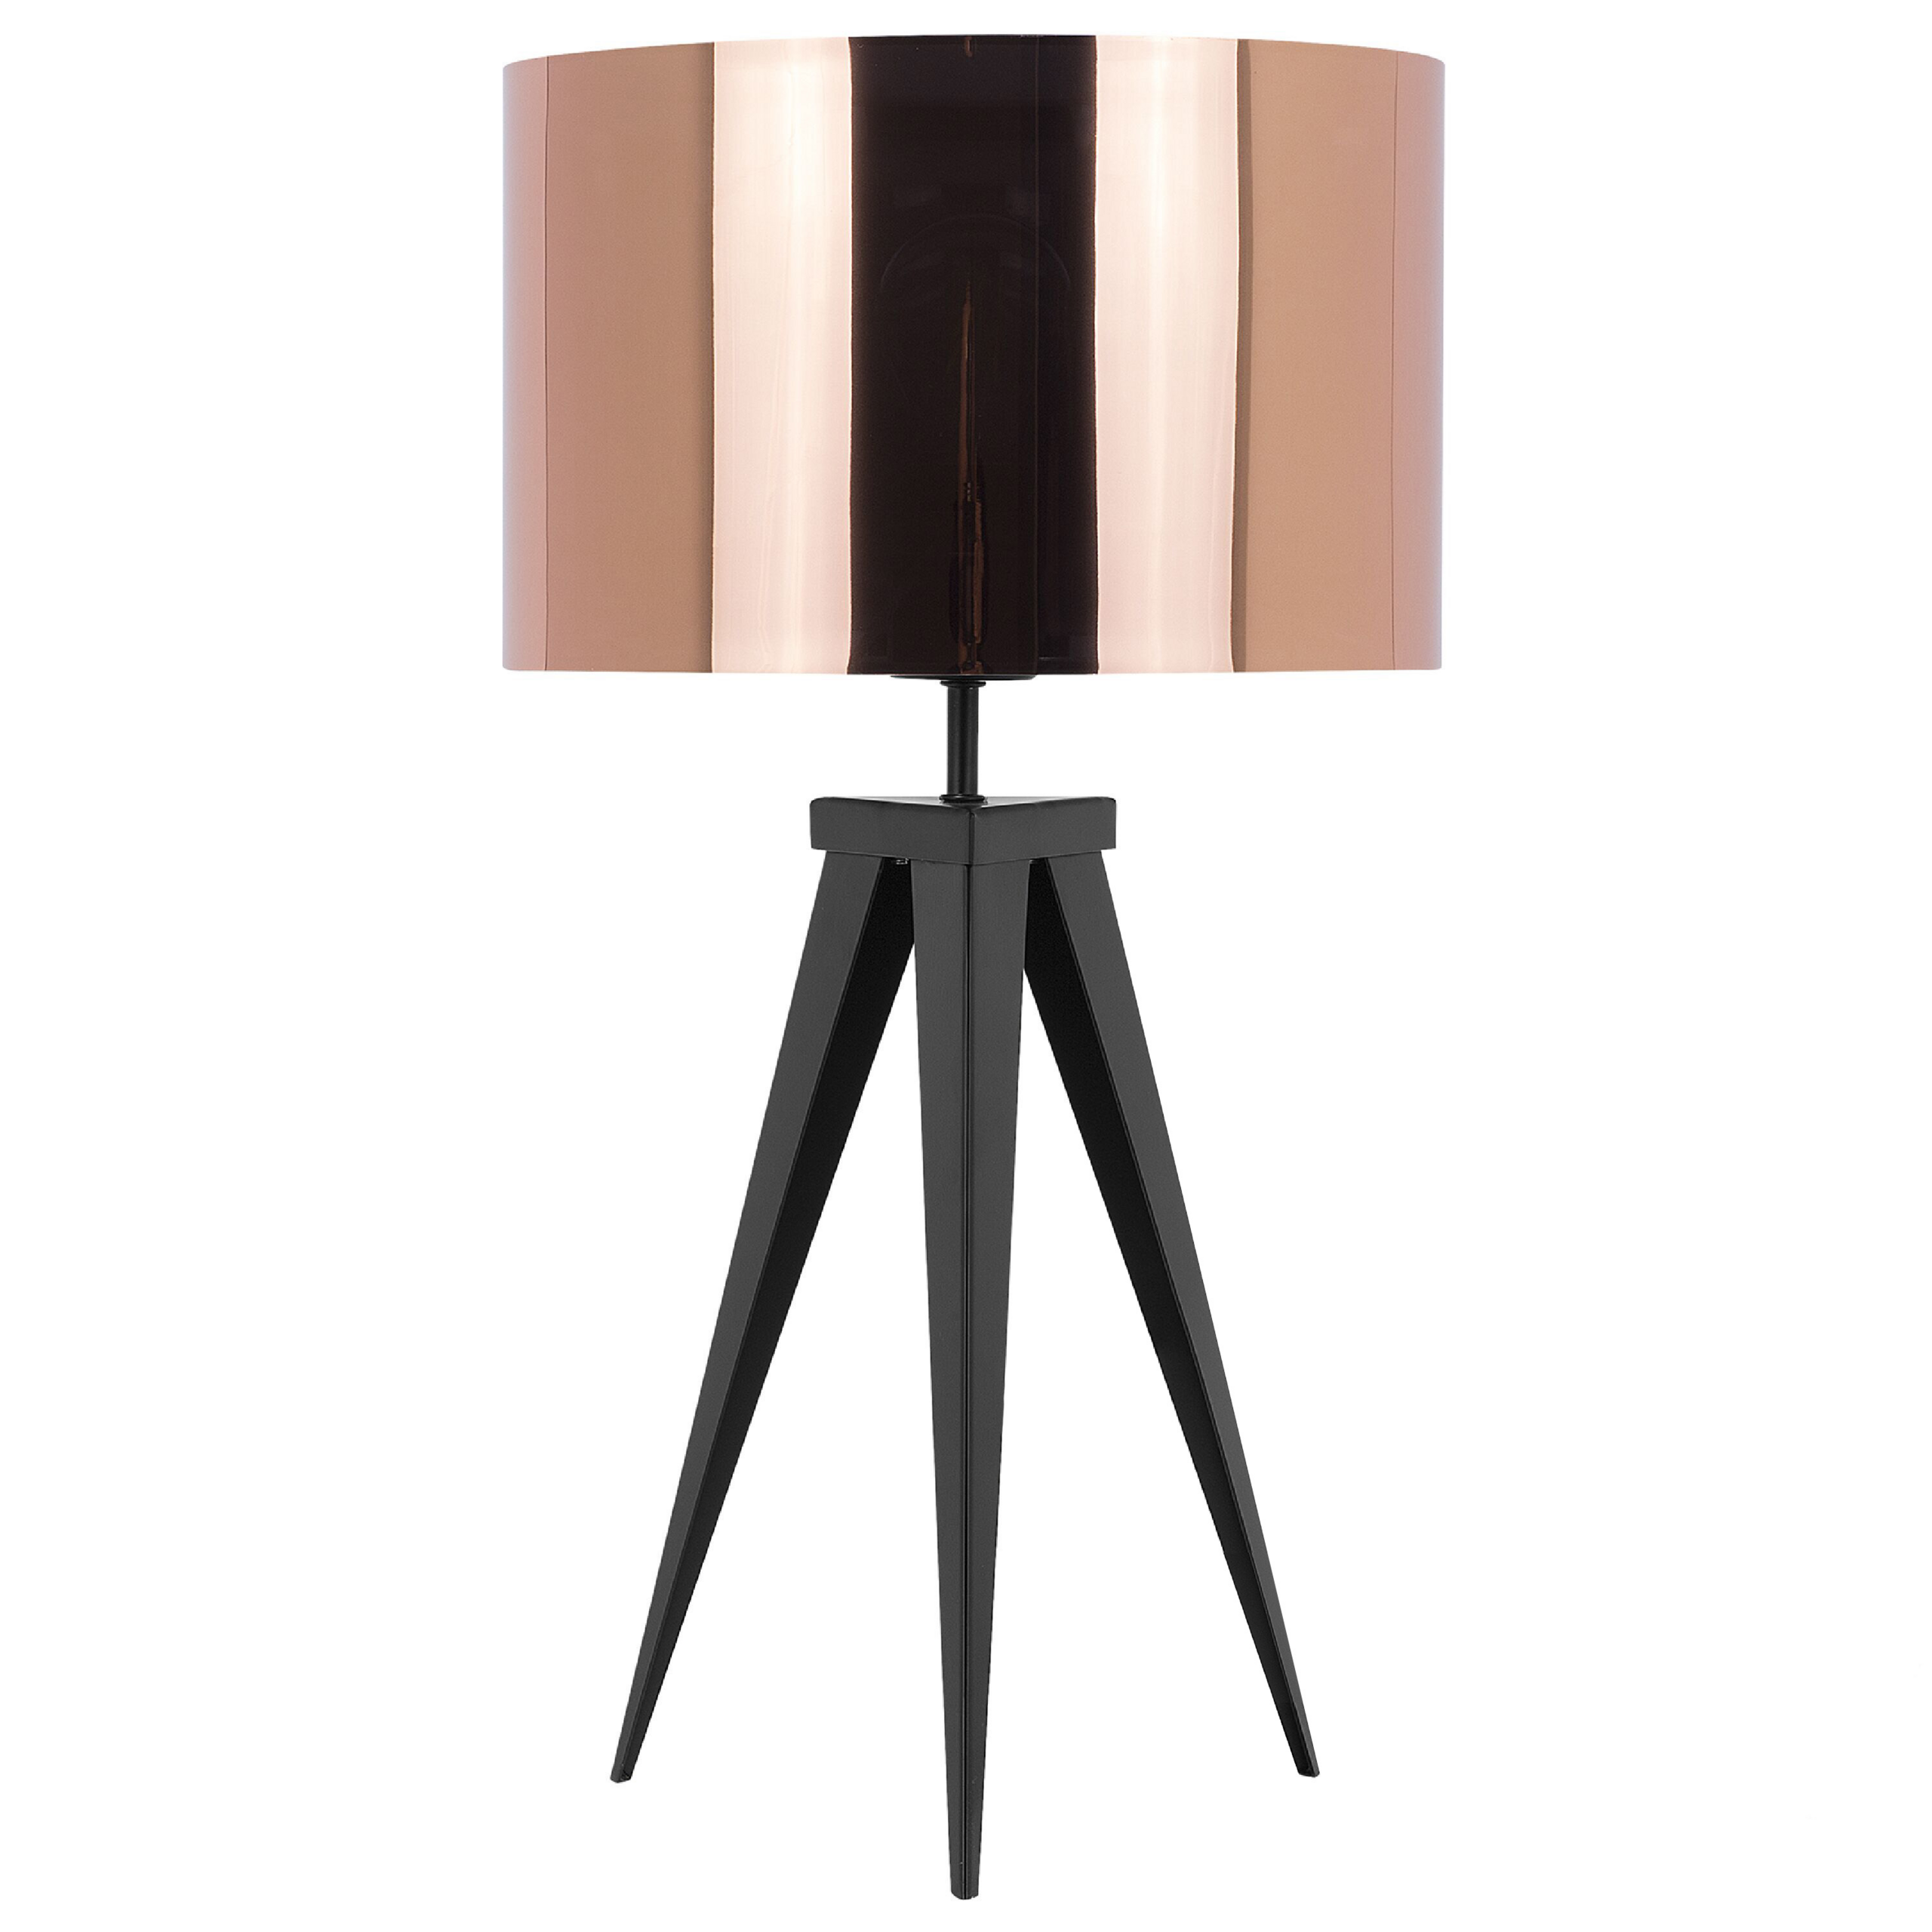 Beliani Tripod Table Lamp Copper with Black Base Drum Shade Industrial